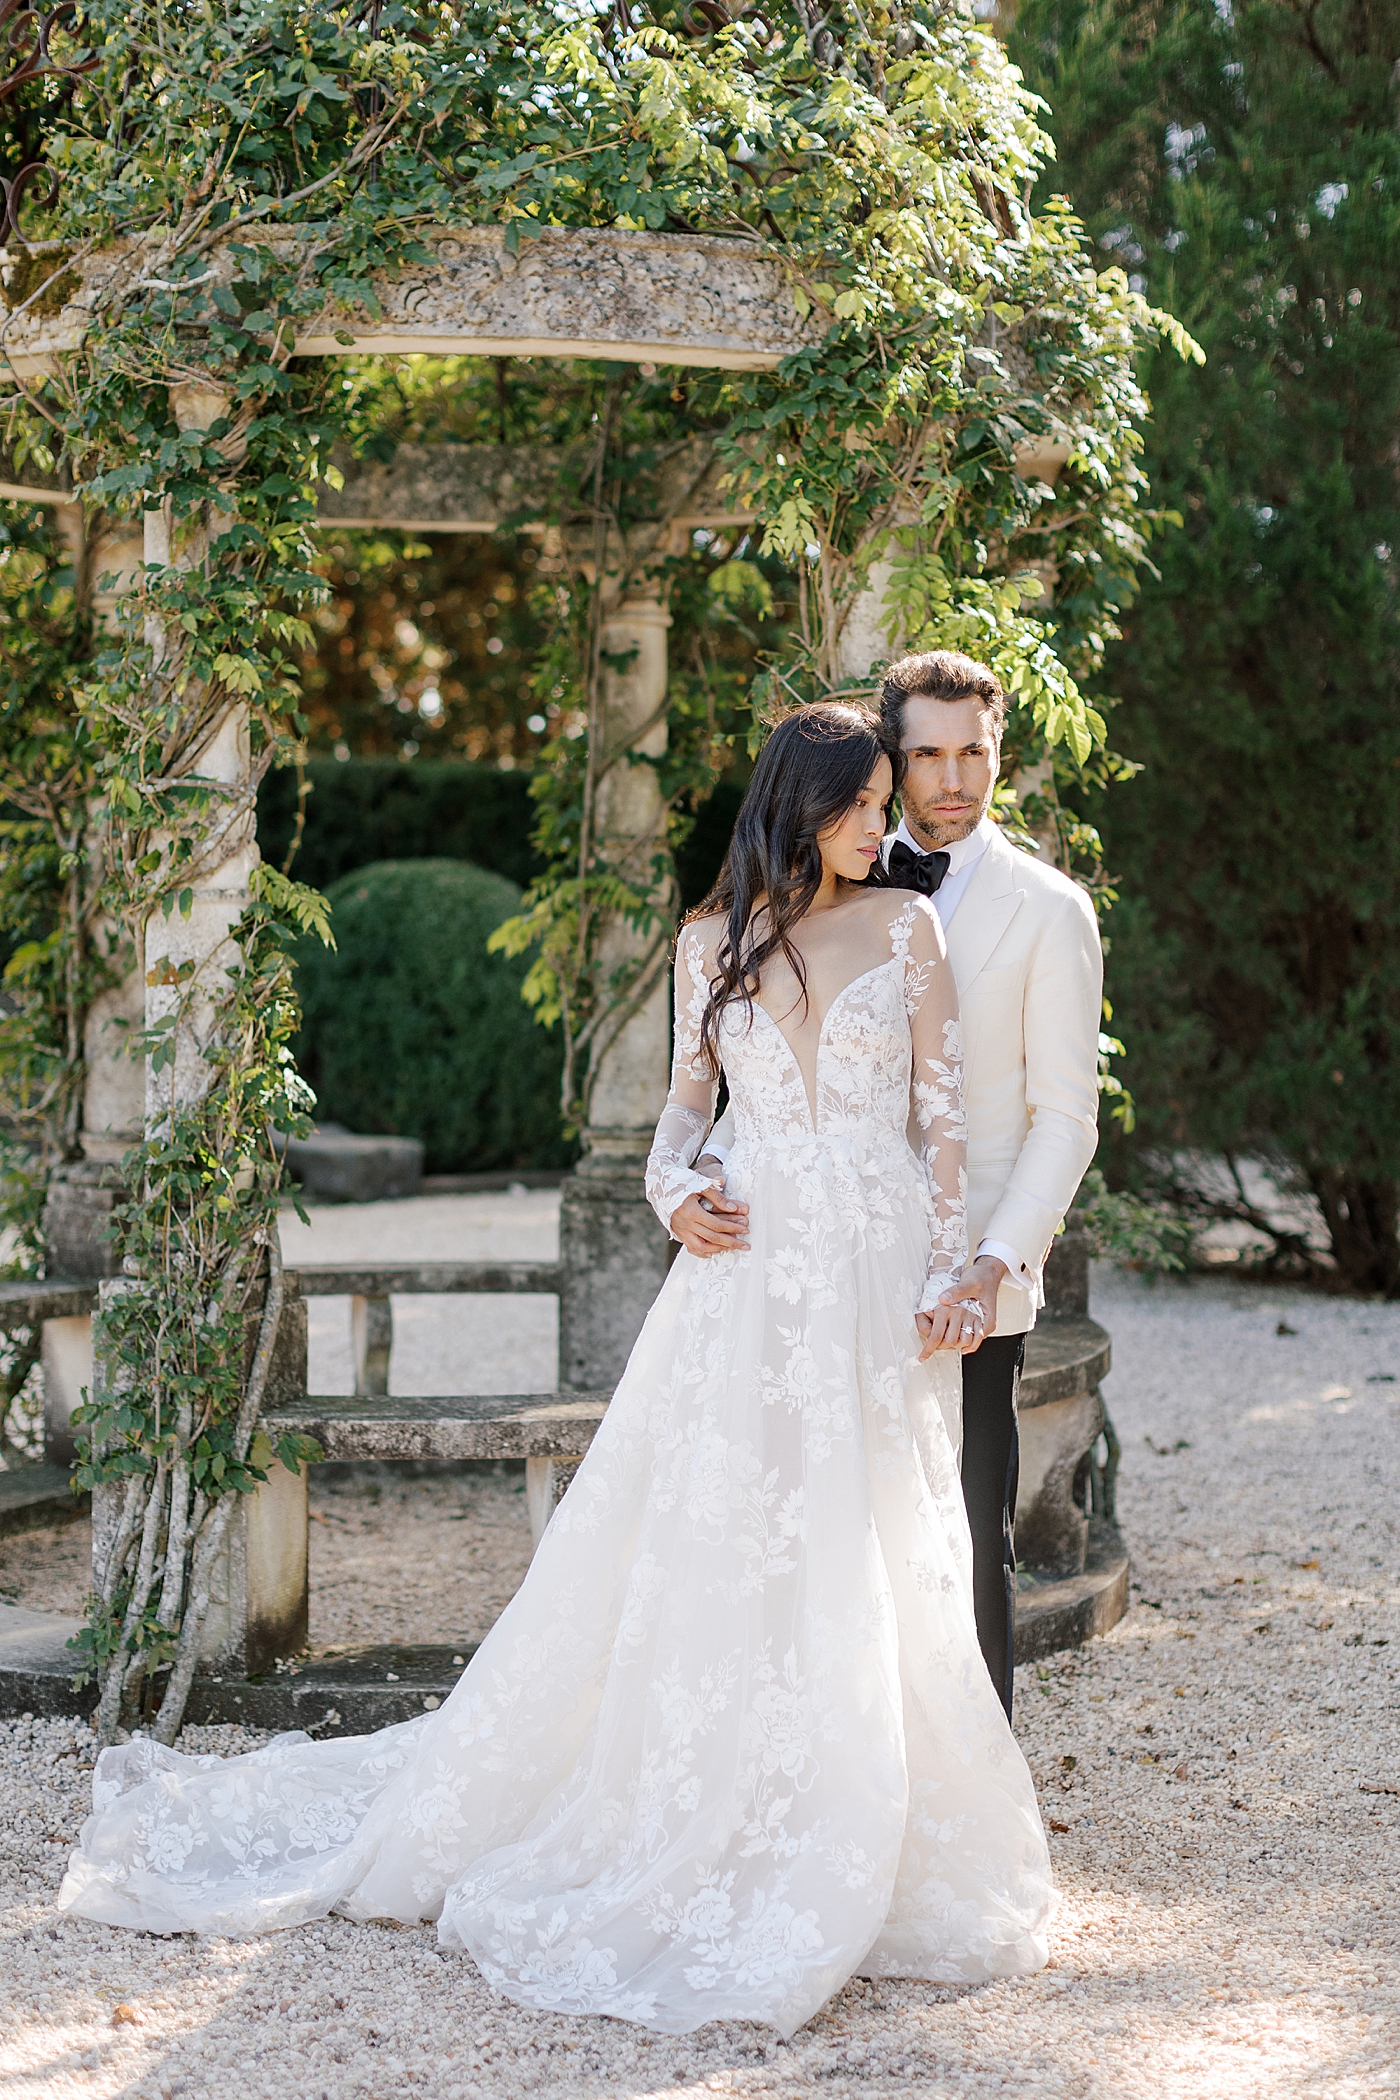 Image of a bride and groom standing together in a European garden during Oheka castle wedding | Image by Hope Helmuth Photography